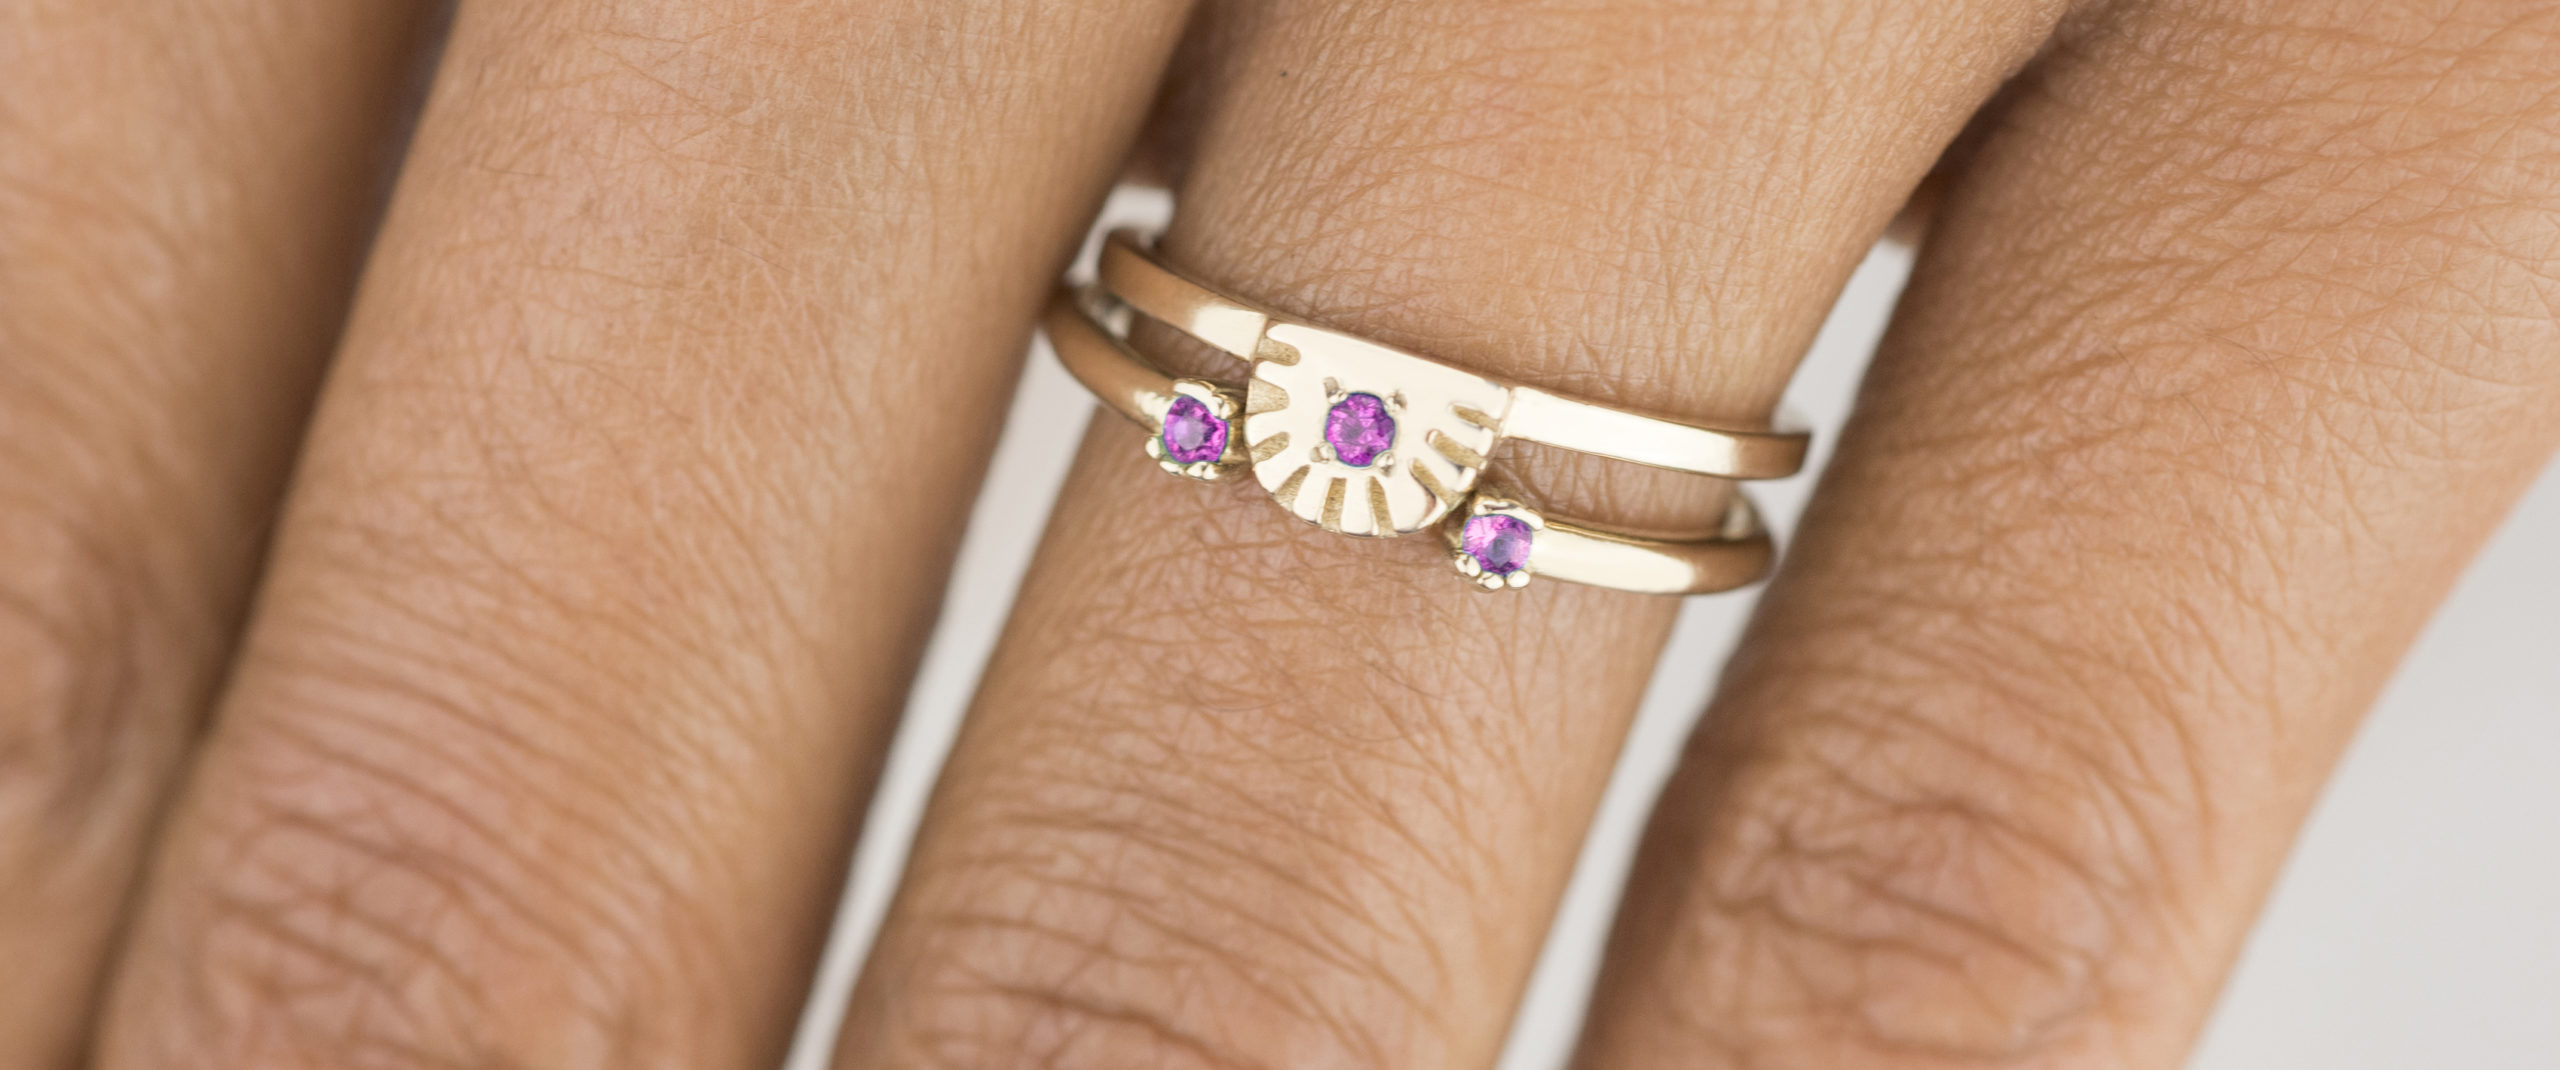 Fuschia Stackable Rings from Bario Neal's Vibrant Collection